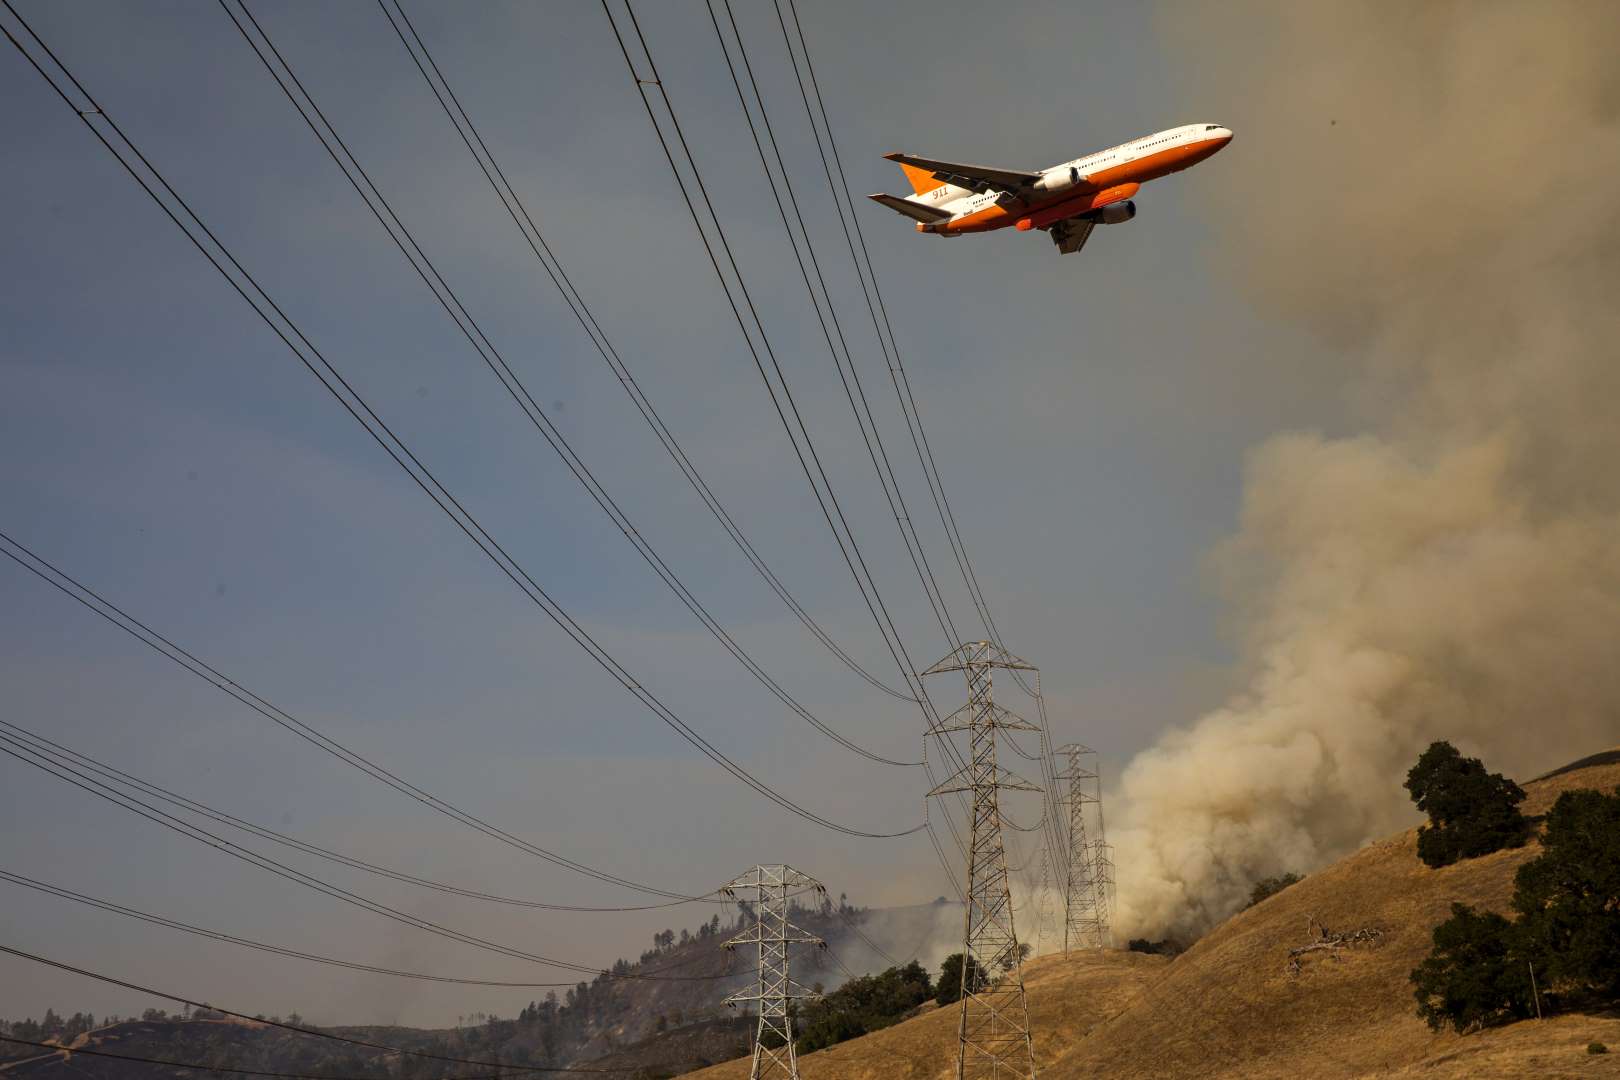 An air tanker flies over PG&E power lines en route to drop fire retardant in the valley below during the firefighting operations to battle the Kincade Fire in Healdsburg, California on 26 October 2019. Photo: Philip Pacheco / AFP / Getty Images